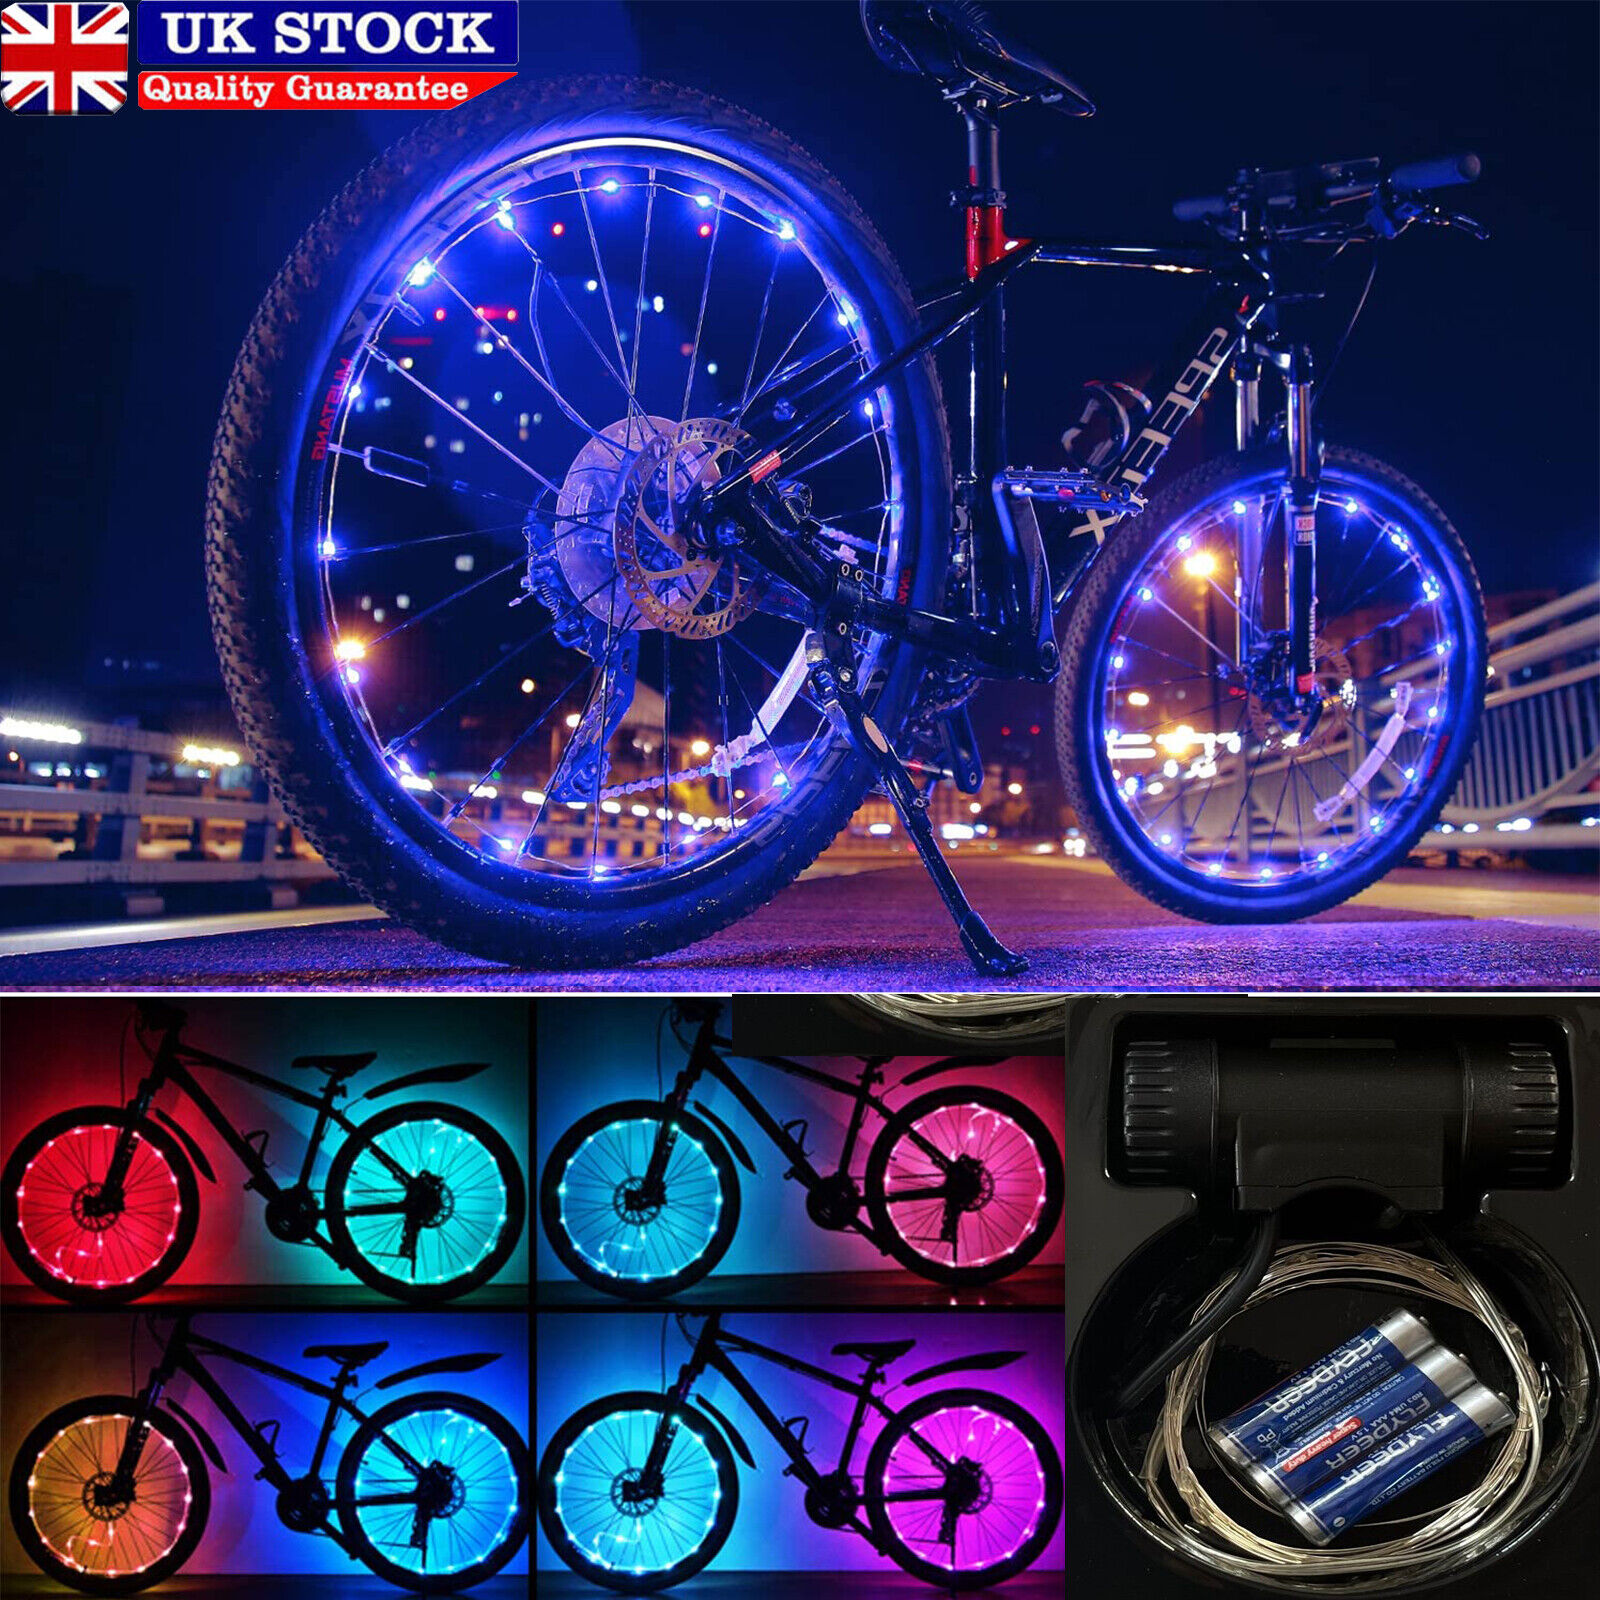 White LED Bike Wheel Lights Brighter and Visible from All Angles for Ultimate Safety and Style 1 Tyre Pack